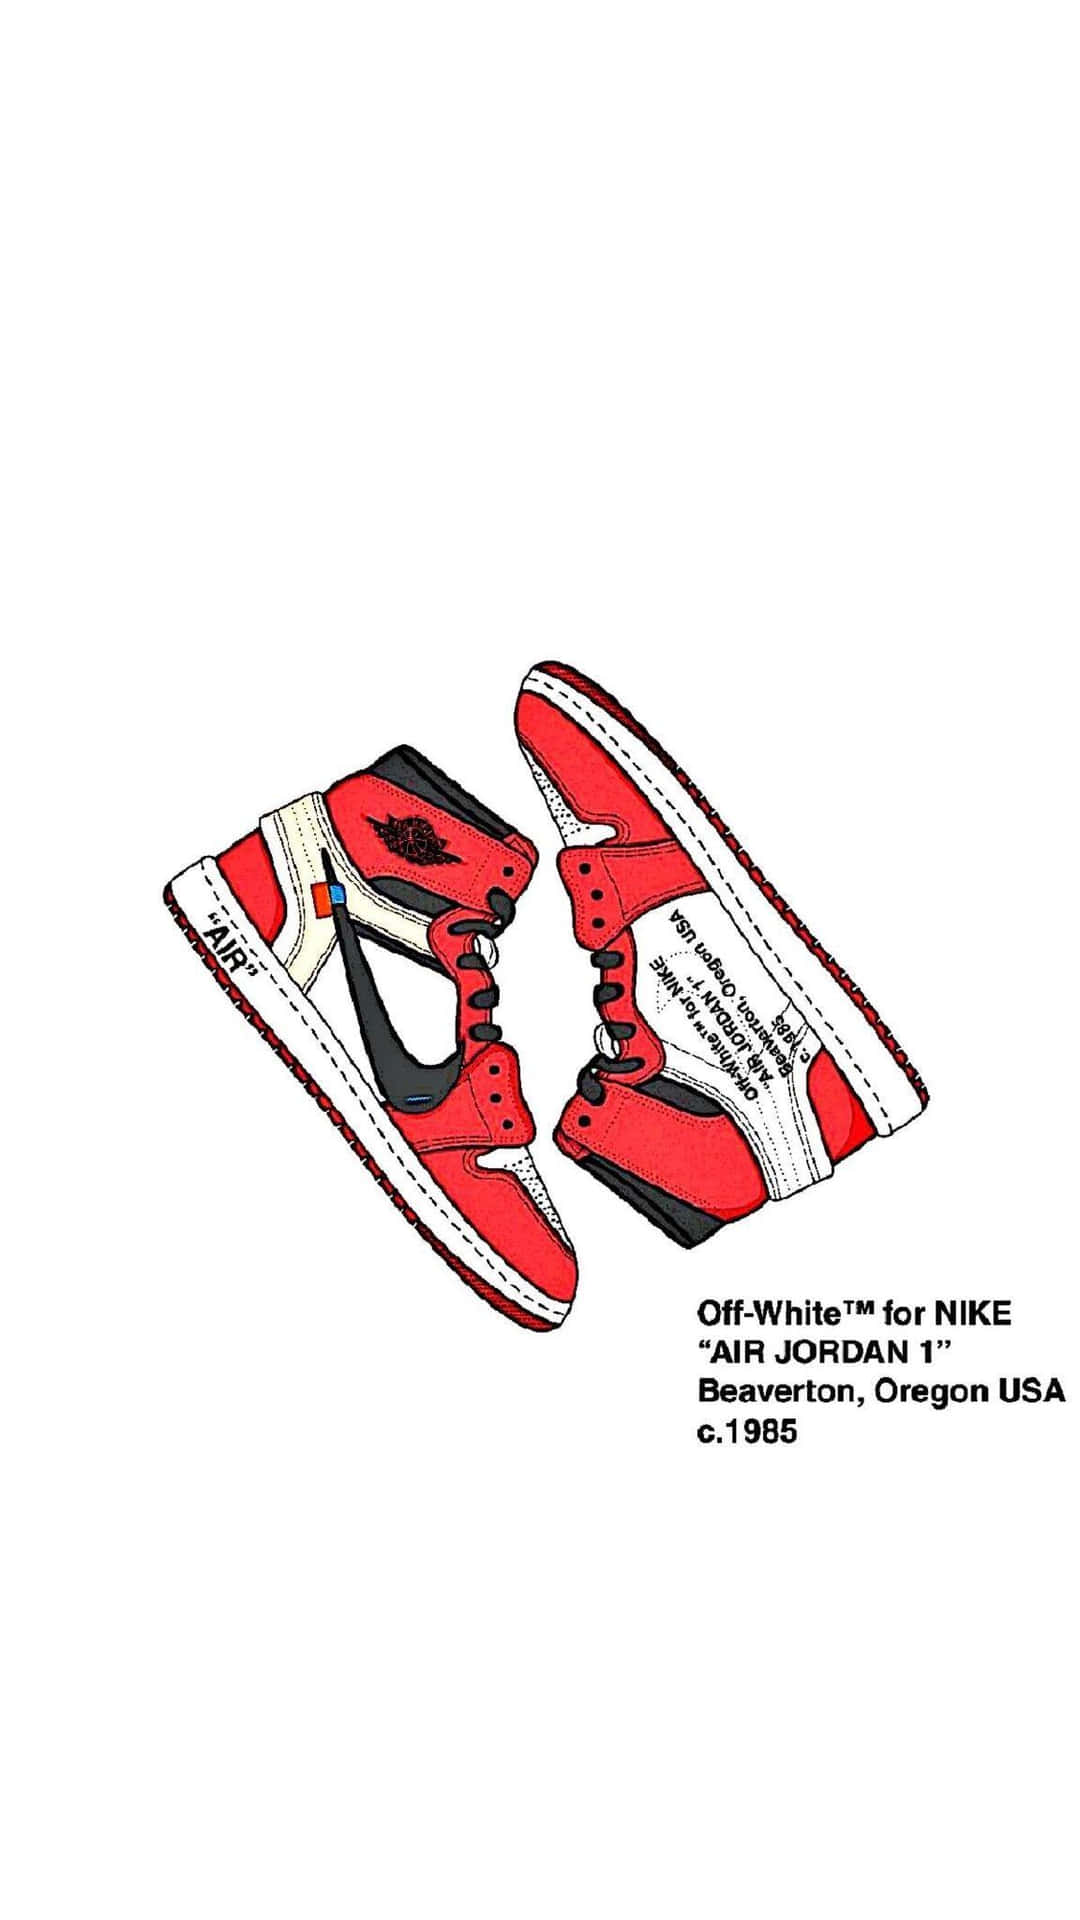 Jordan 1 OFFWHITE wallpaper by GreenWilliam494  Download on ZEDGE  d81b